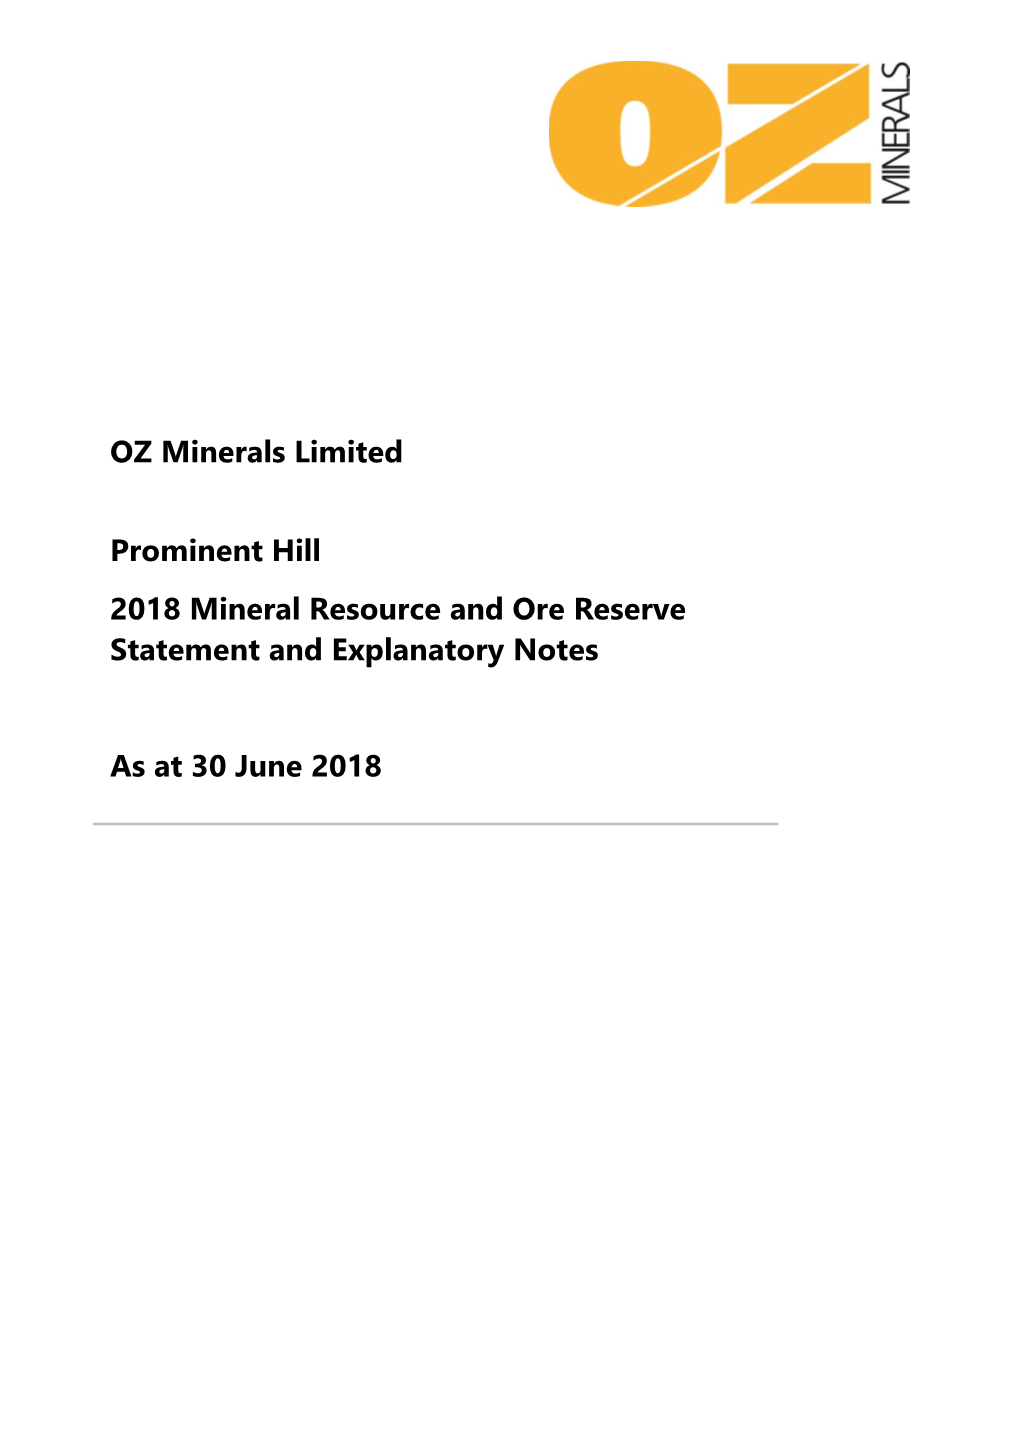 Prominent Hill Mineral Resource and Ore Reserve Statement As at 30